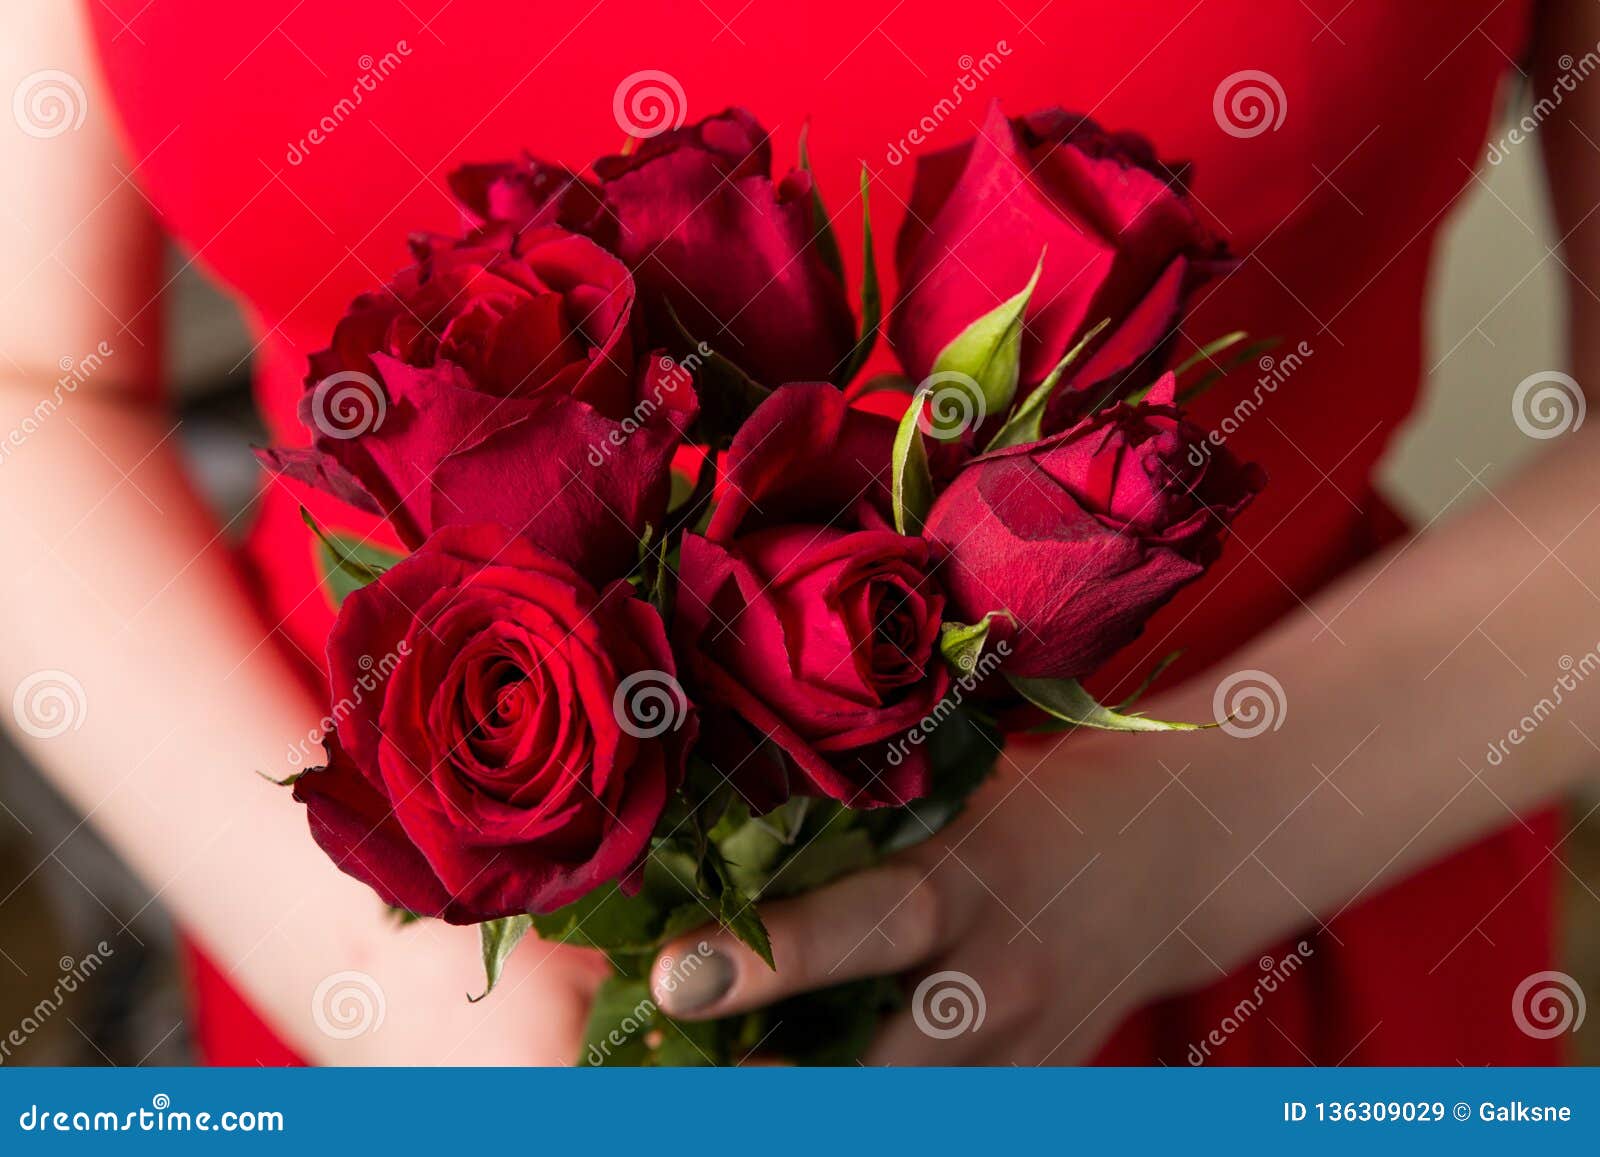 Beautiful Woman Holding Red Rose Bouquet, Romantic Valentines Day ...